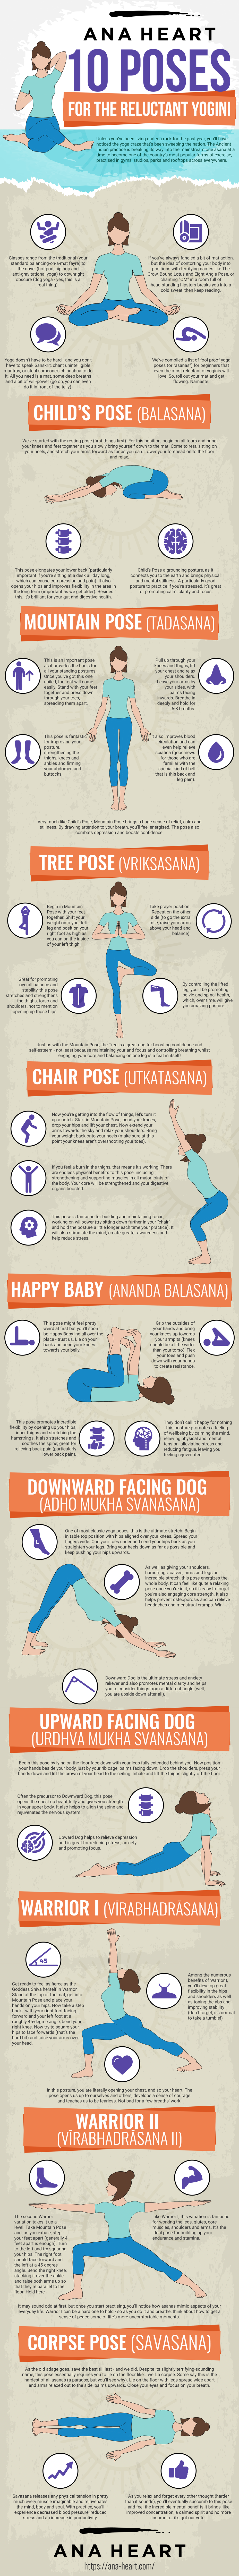 9 Yoga Poses You Can Do At Your Desk Without Looking Really Weird  (Infographic)